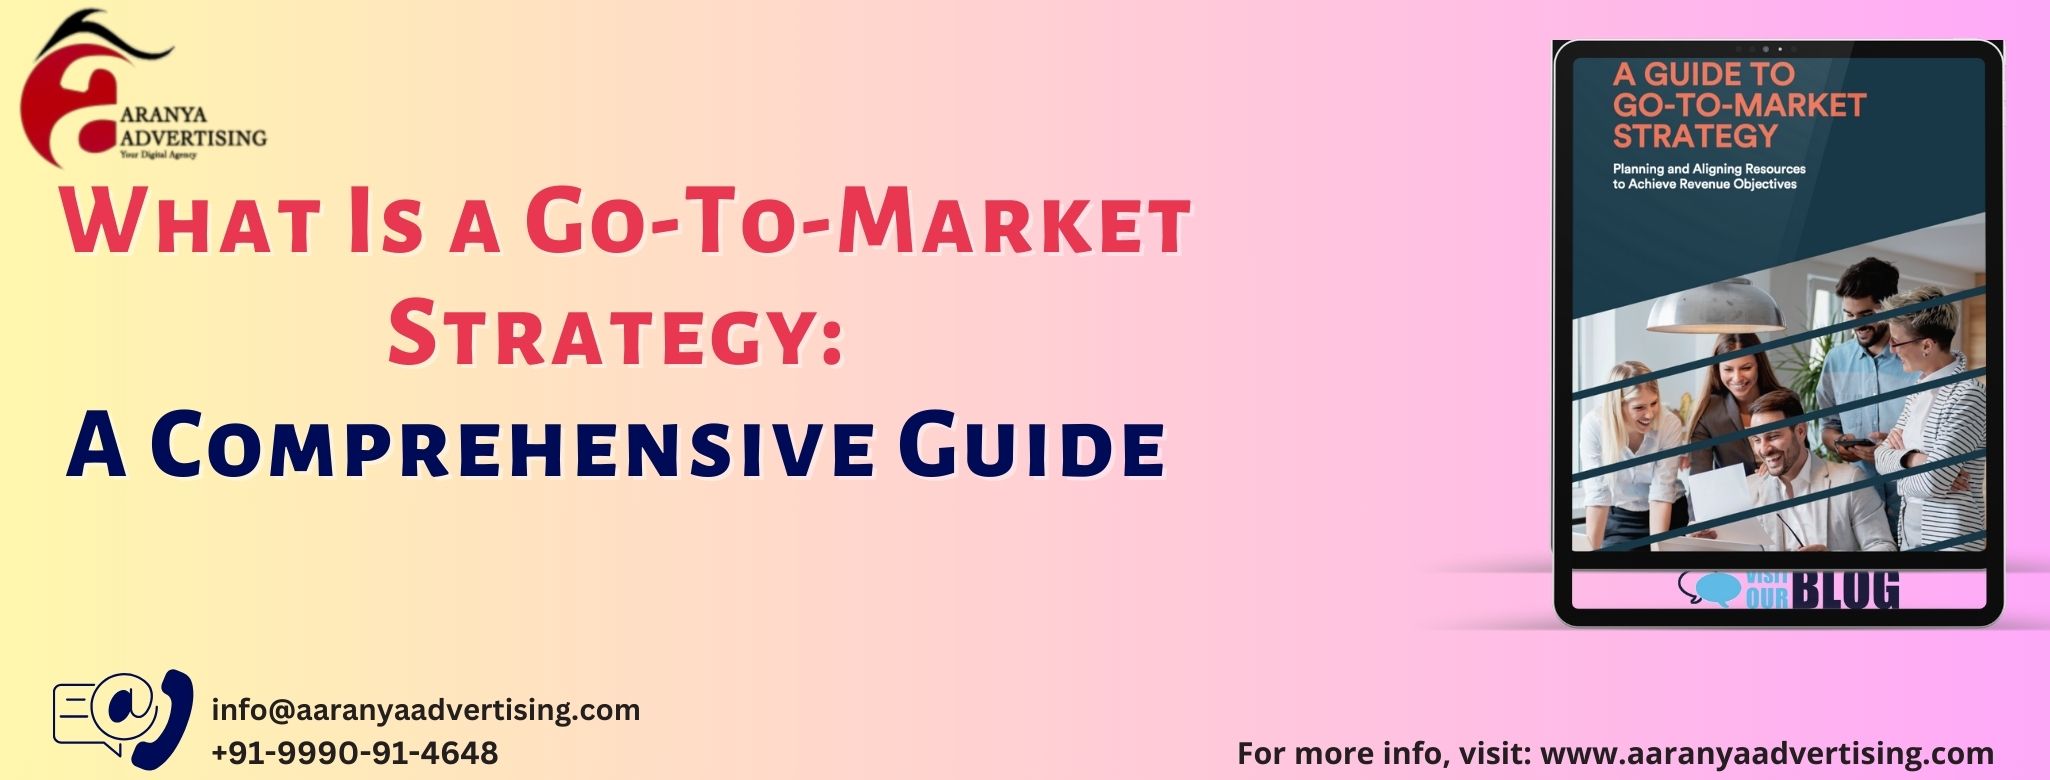 A go-to-market (GTM) strategy is a step-by-step plan designed to bring a new product to market and drive demand.